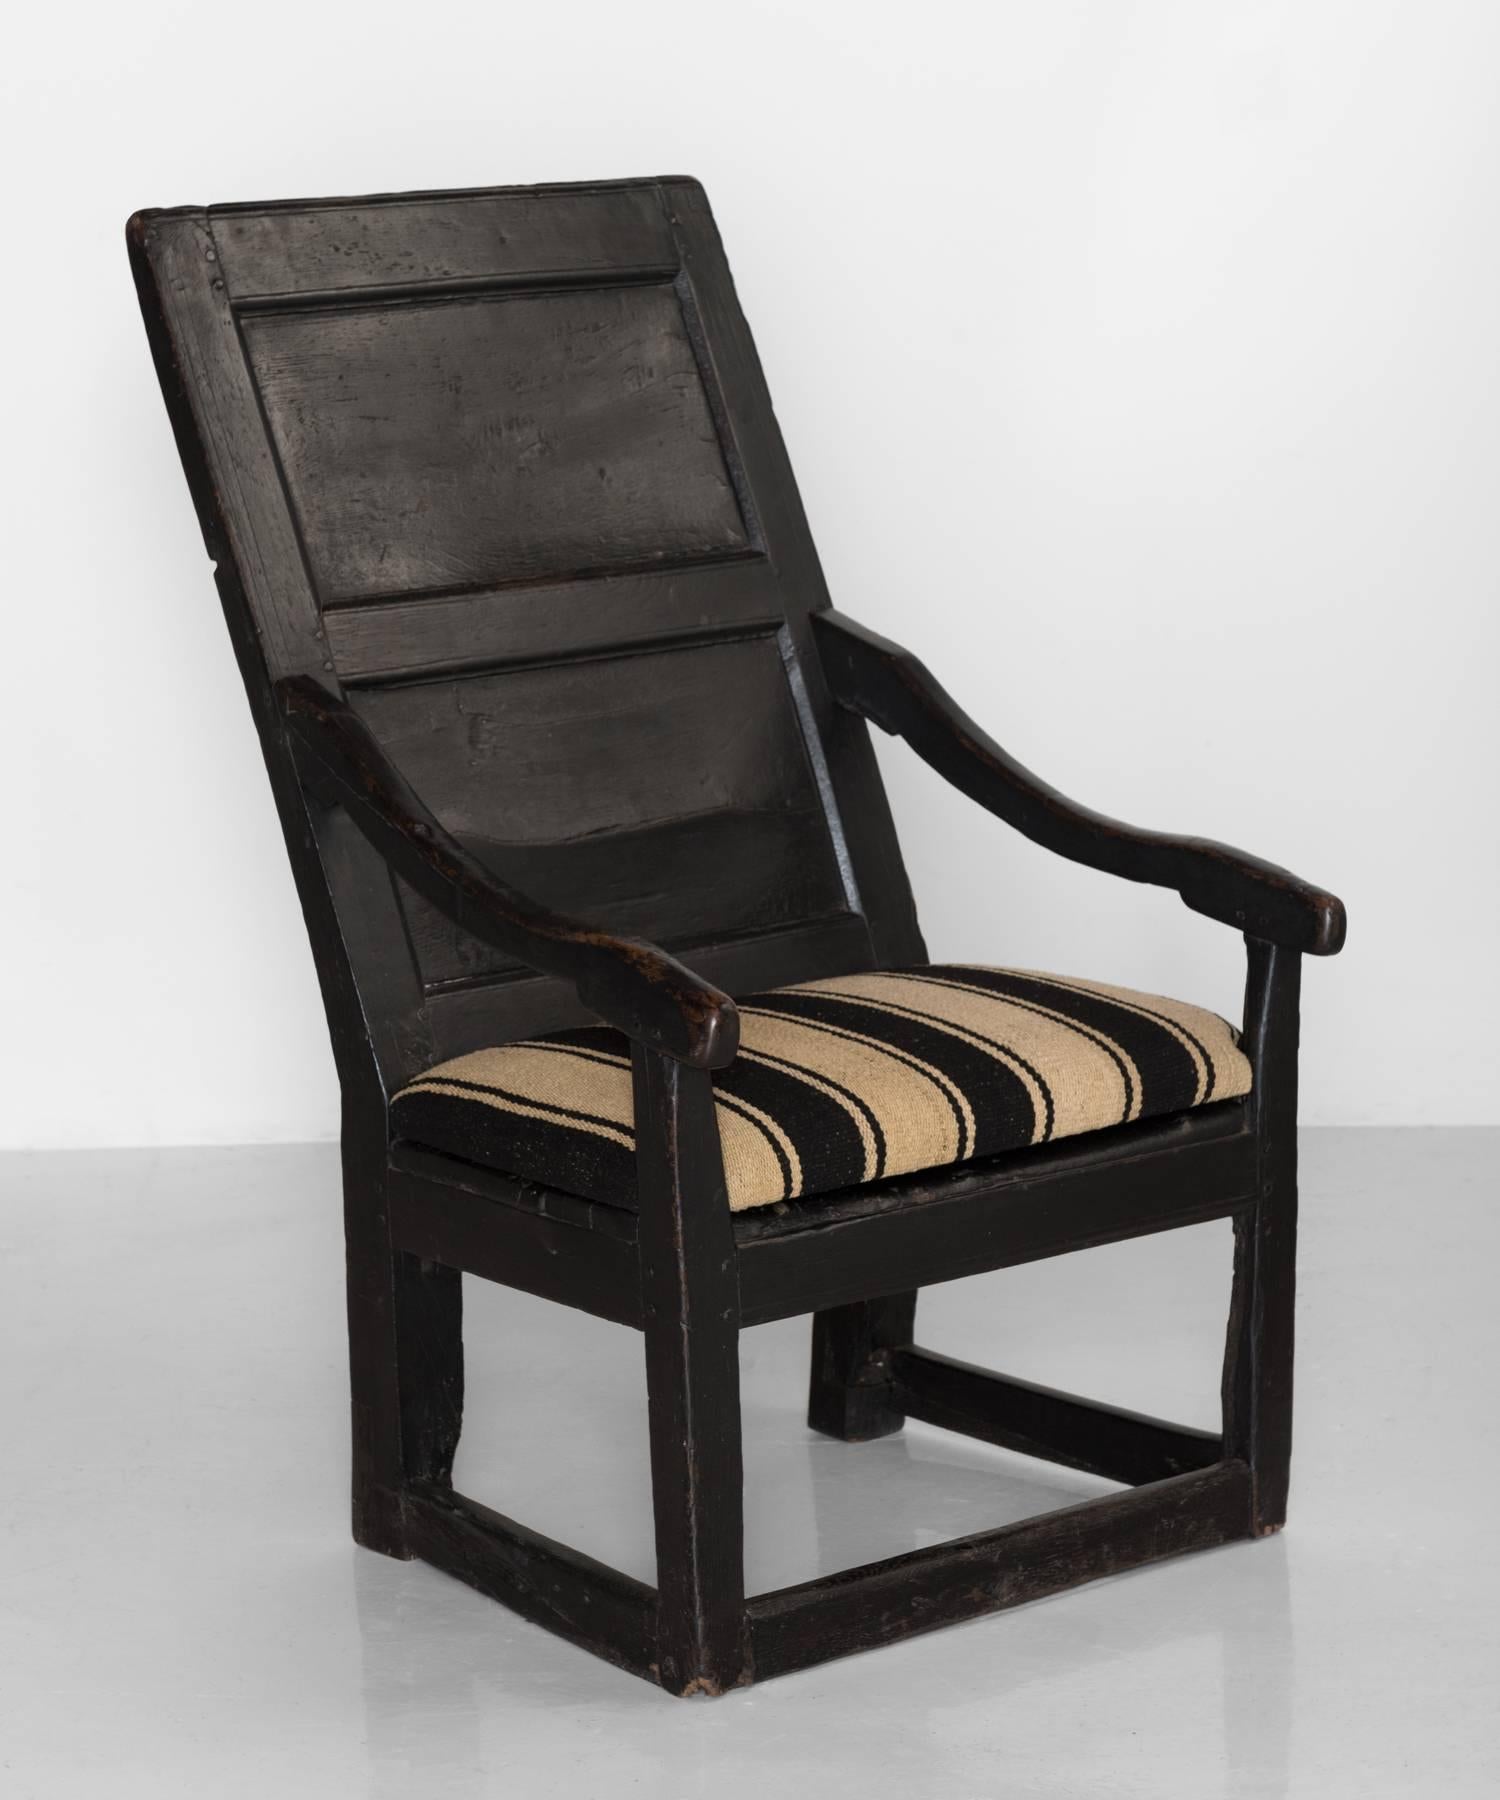 Georgian oak armchair, Wales, circa 1790.

Country armchair with panelled back and early black paint finish. Seat upholstered in an antique horse blanket.

Measures: 24